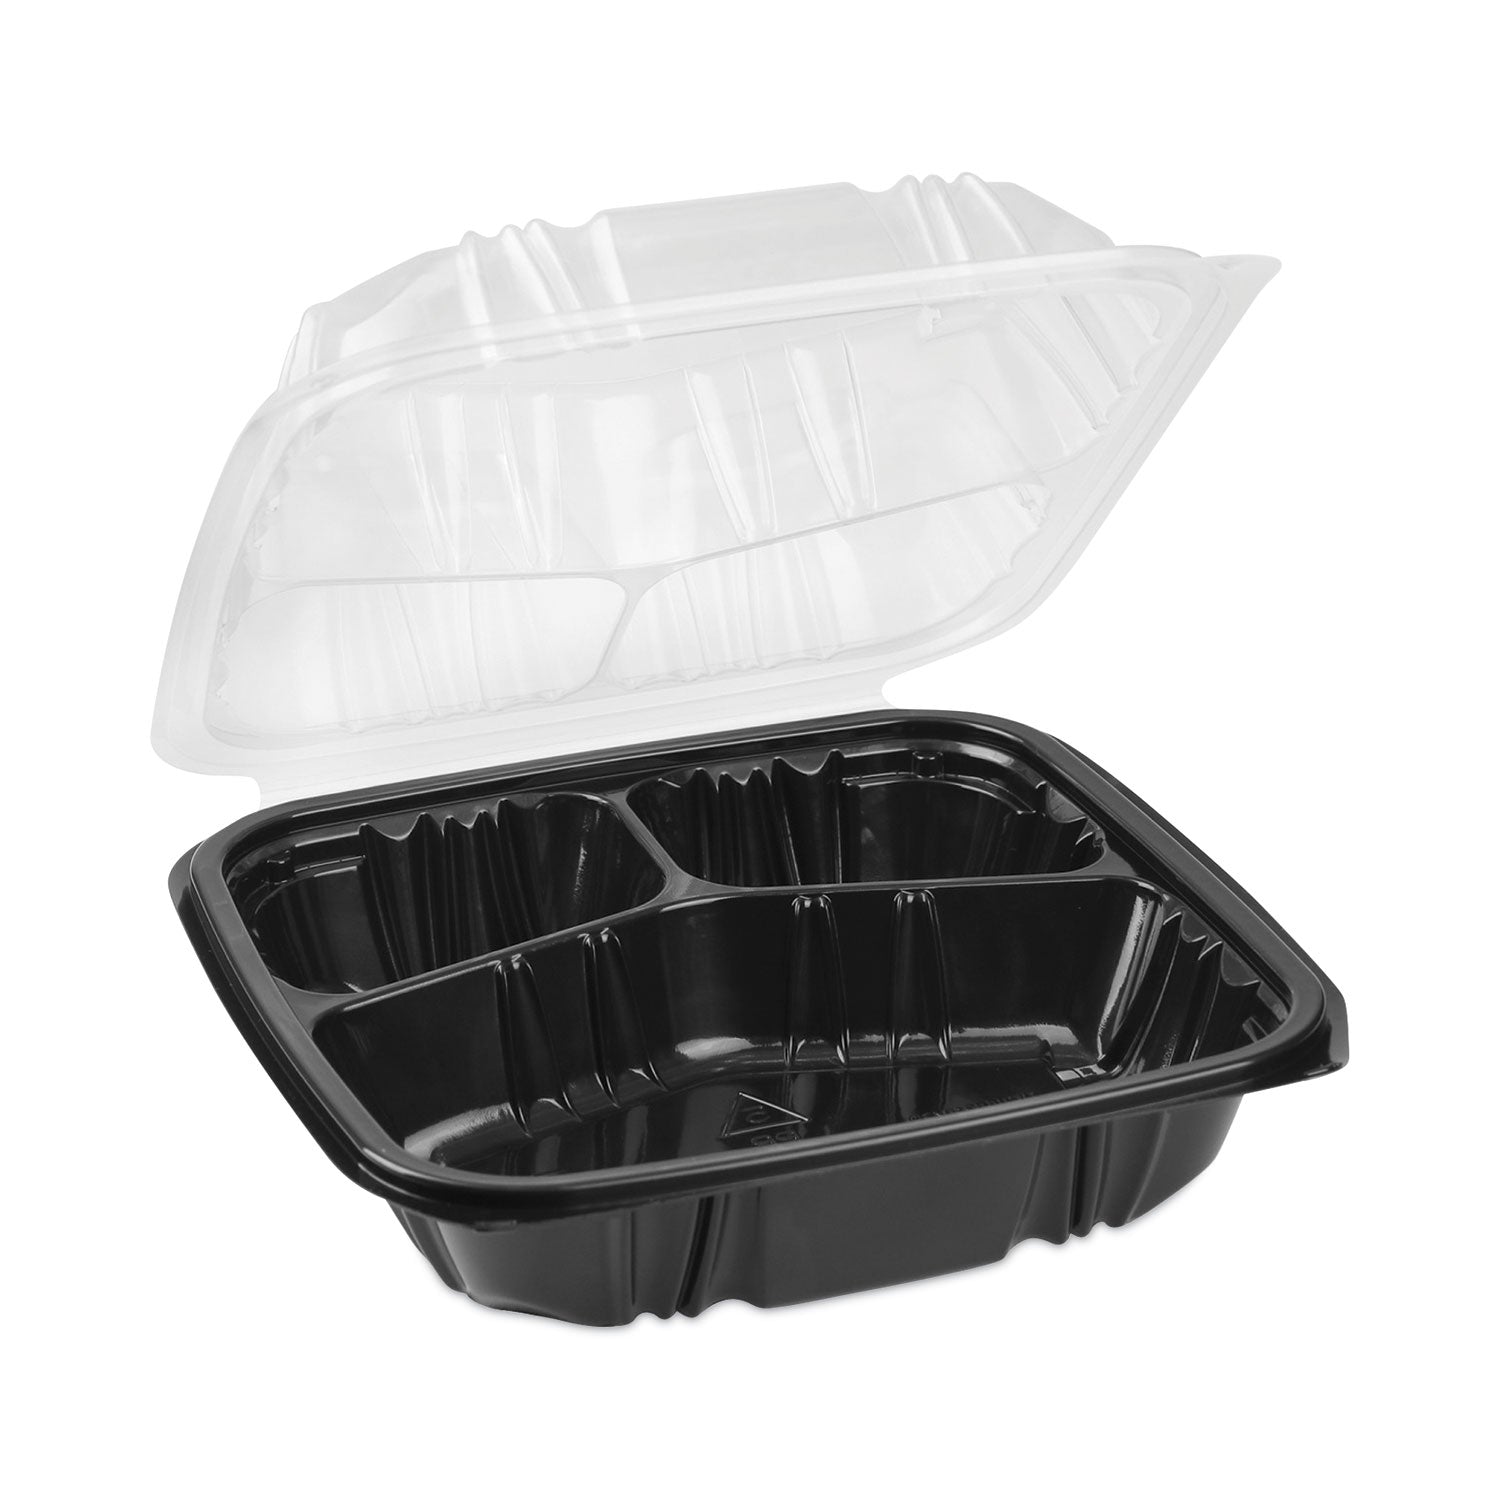 earthchoice-vented-dual-color-microwavable-hinged-lid-container-33oz-85x85x3-3-compartment-black-clear-plastic-150-ct_pctdc858330b000 - 2